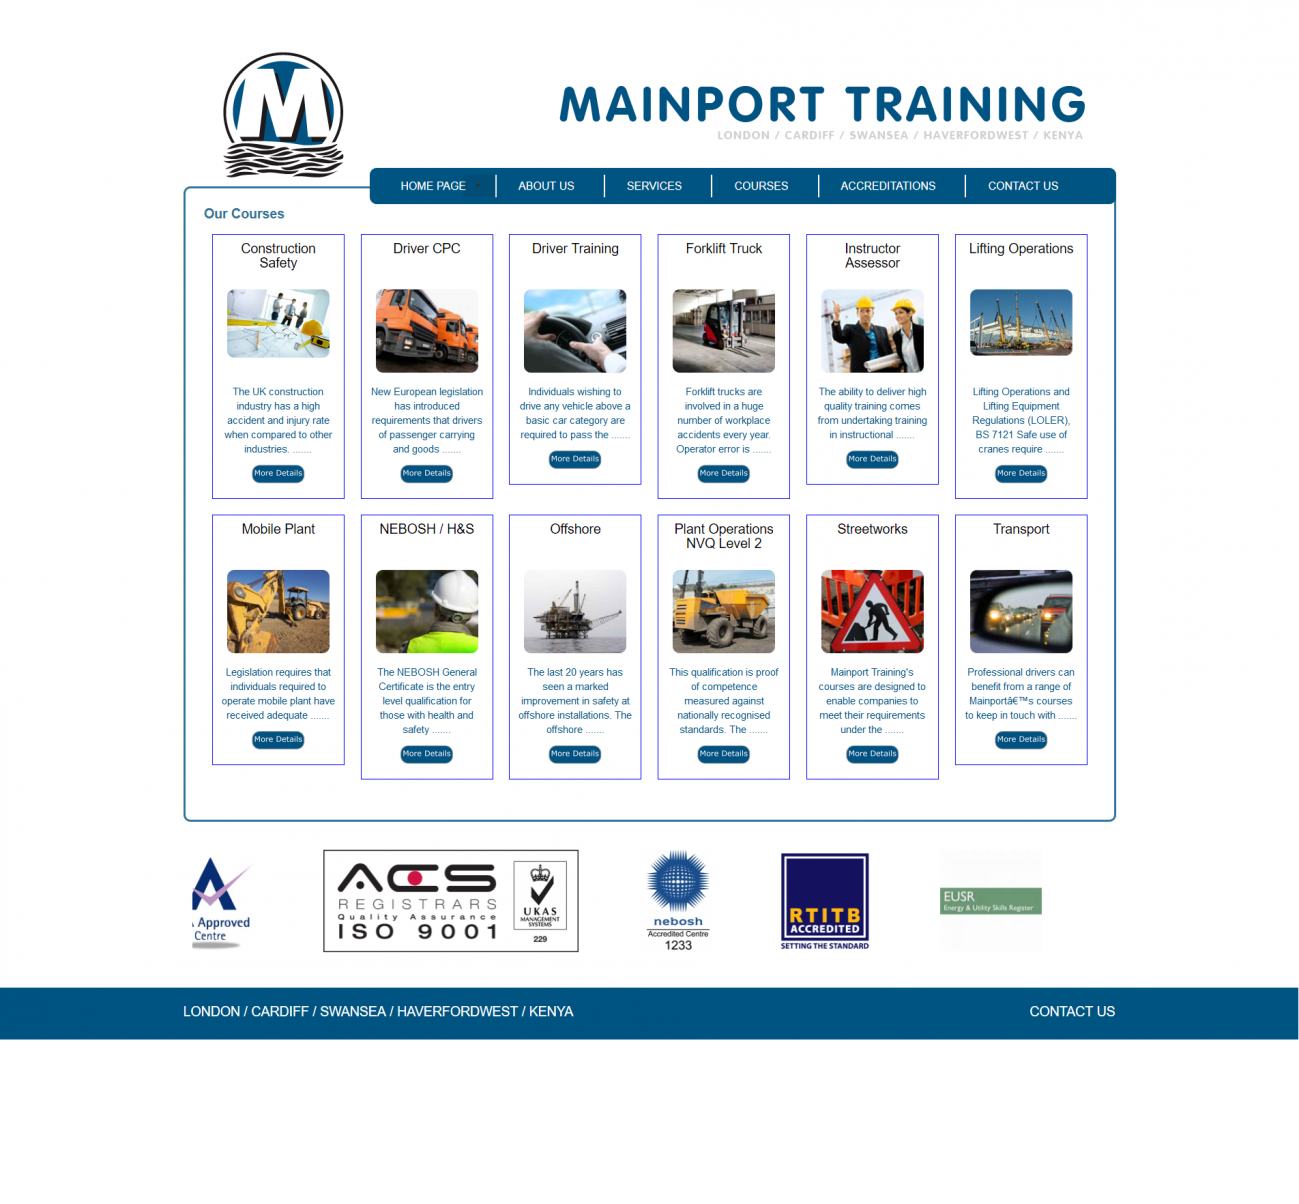 An image from Mainport Training